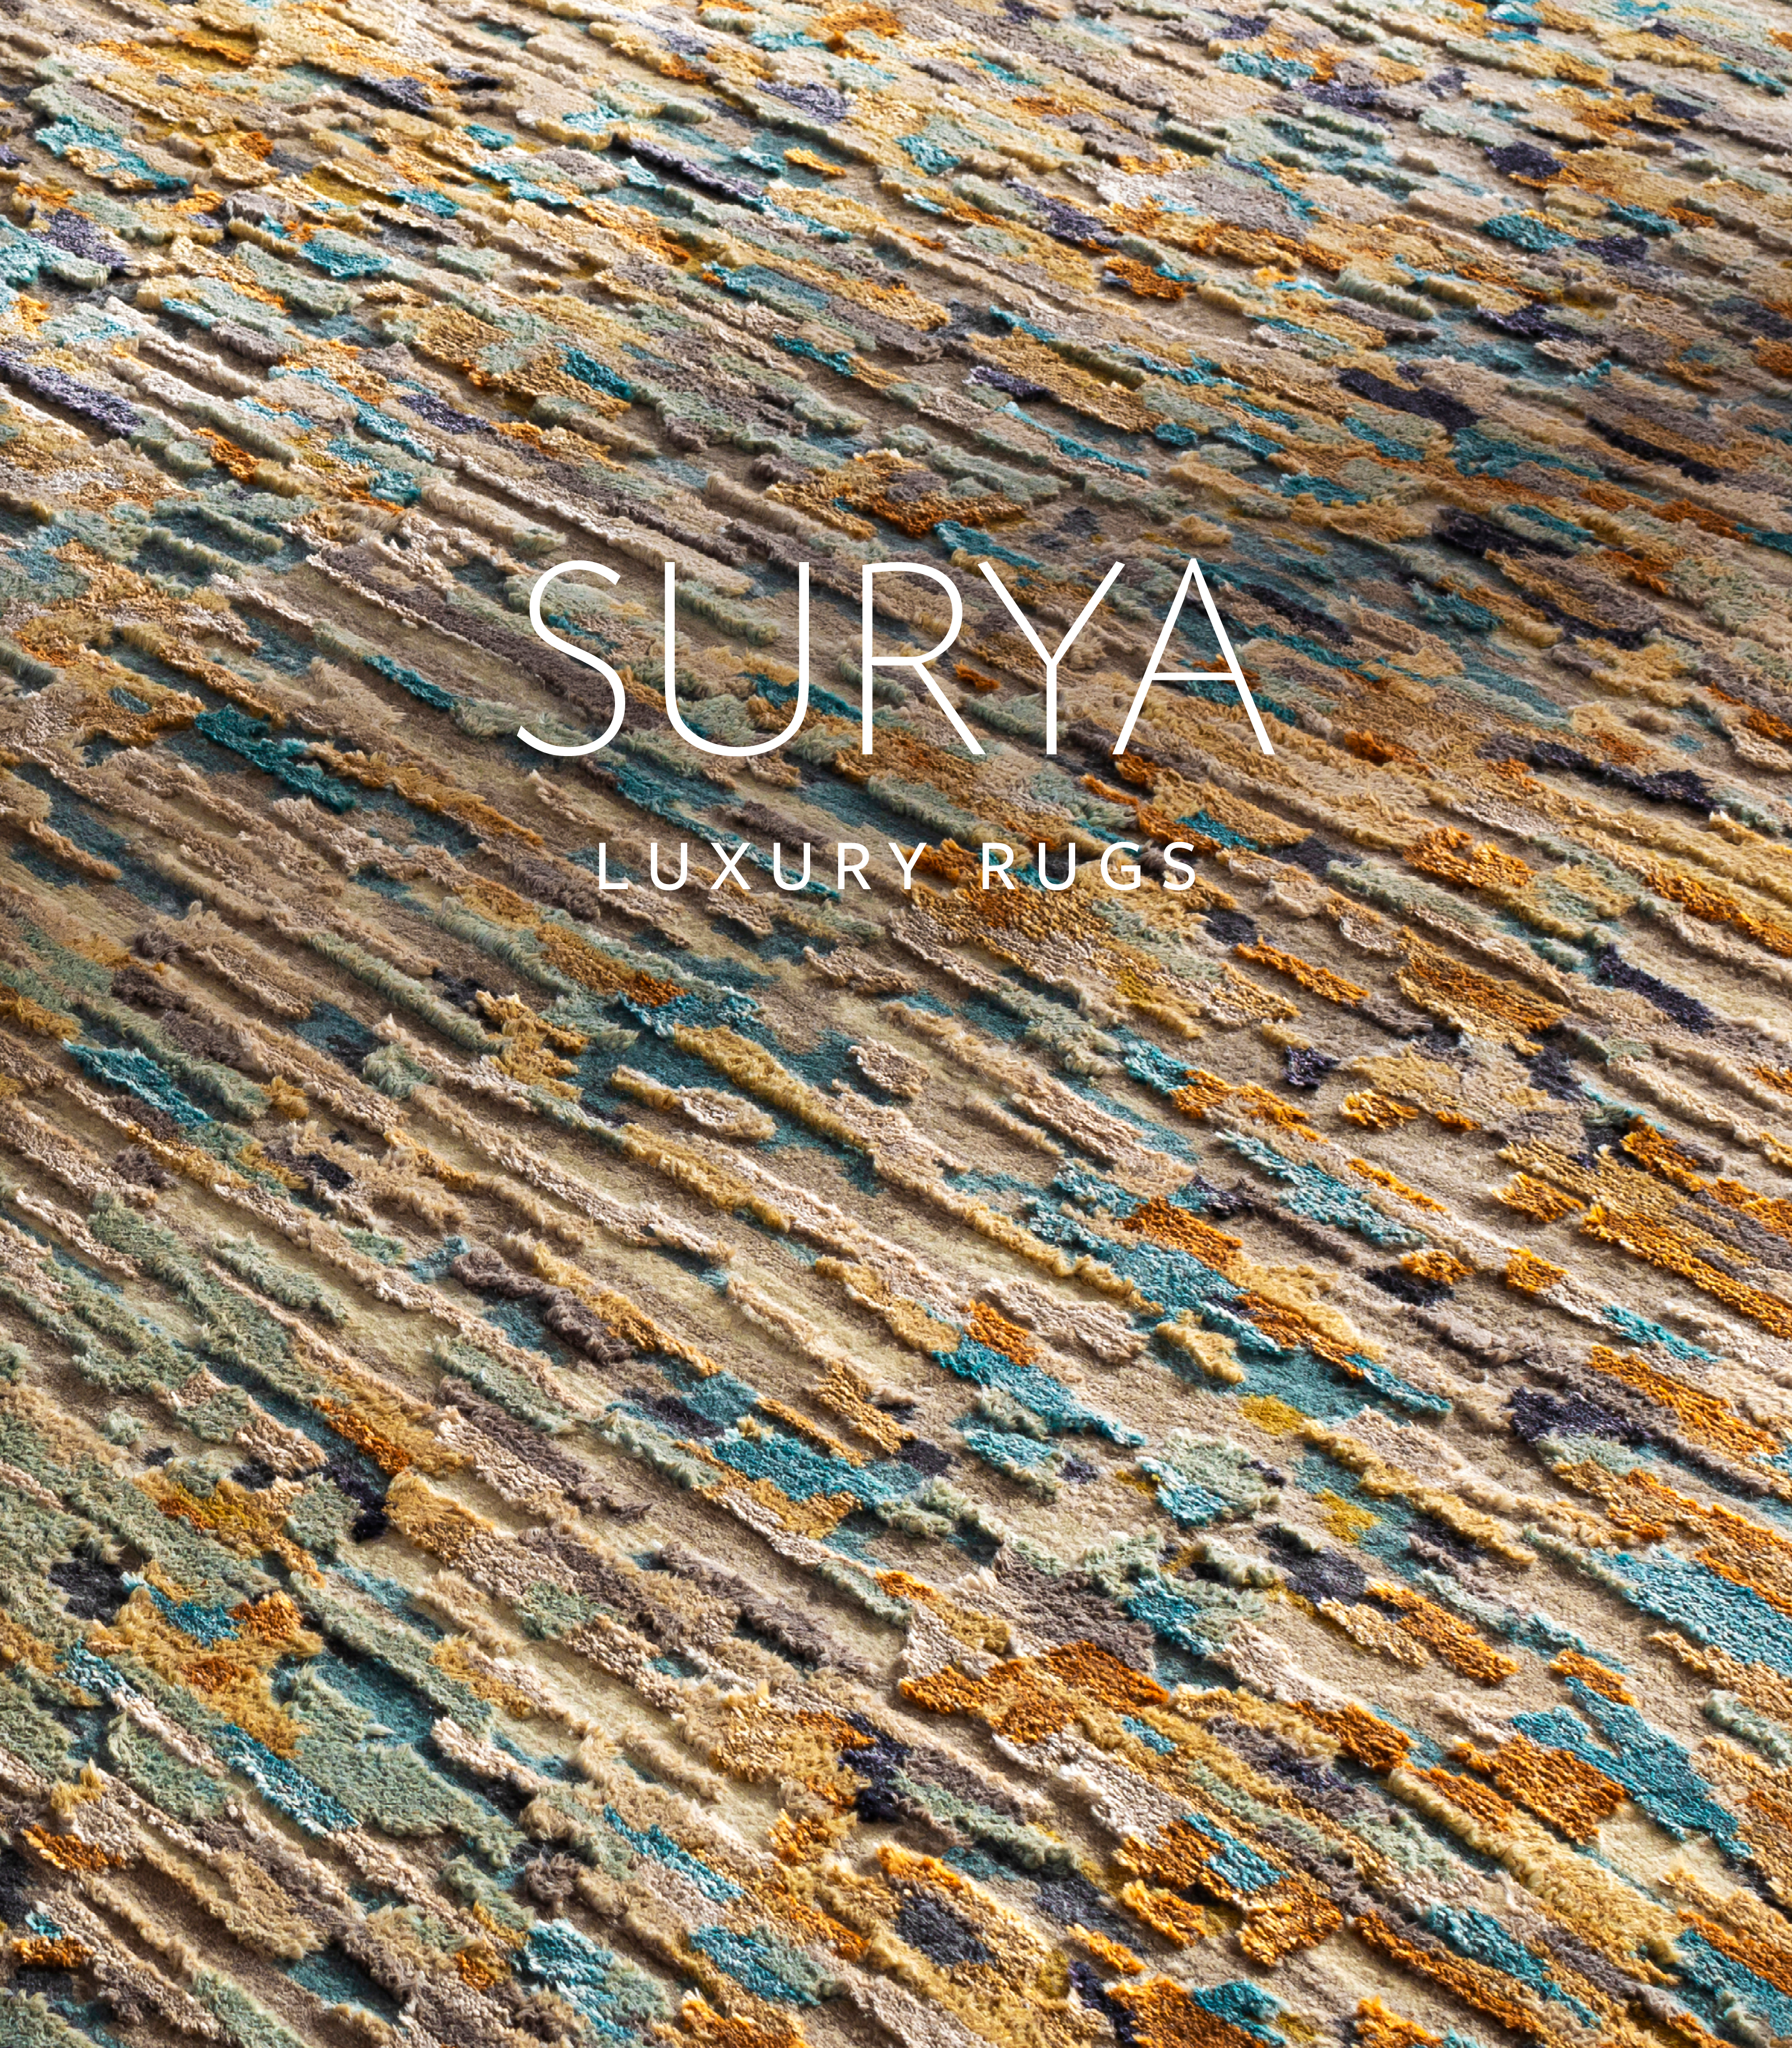 Luxury%20Catalog%20Press%20Release_Luxury%20Rugs%202021%20Cover.png